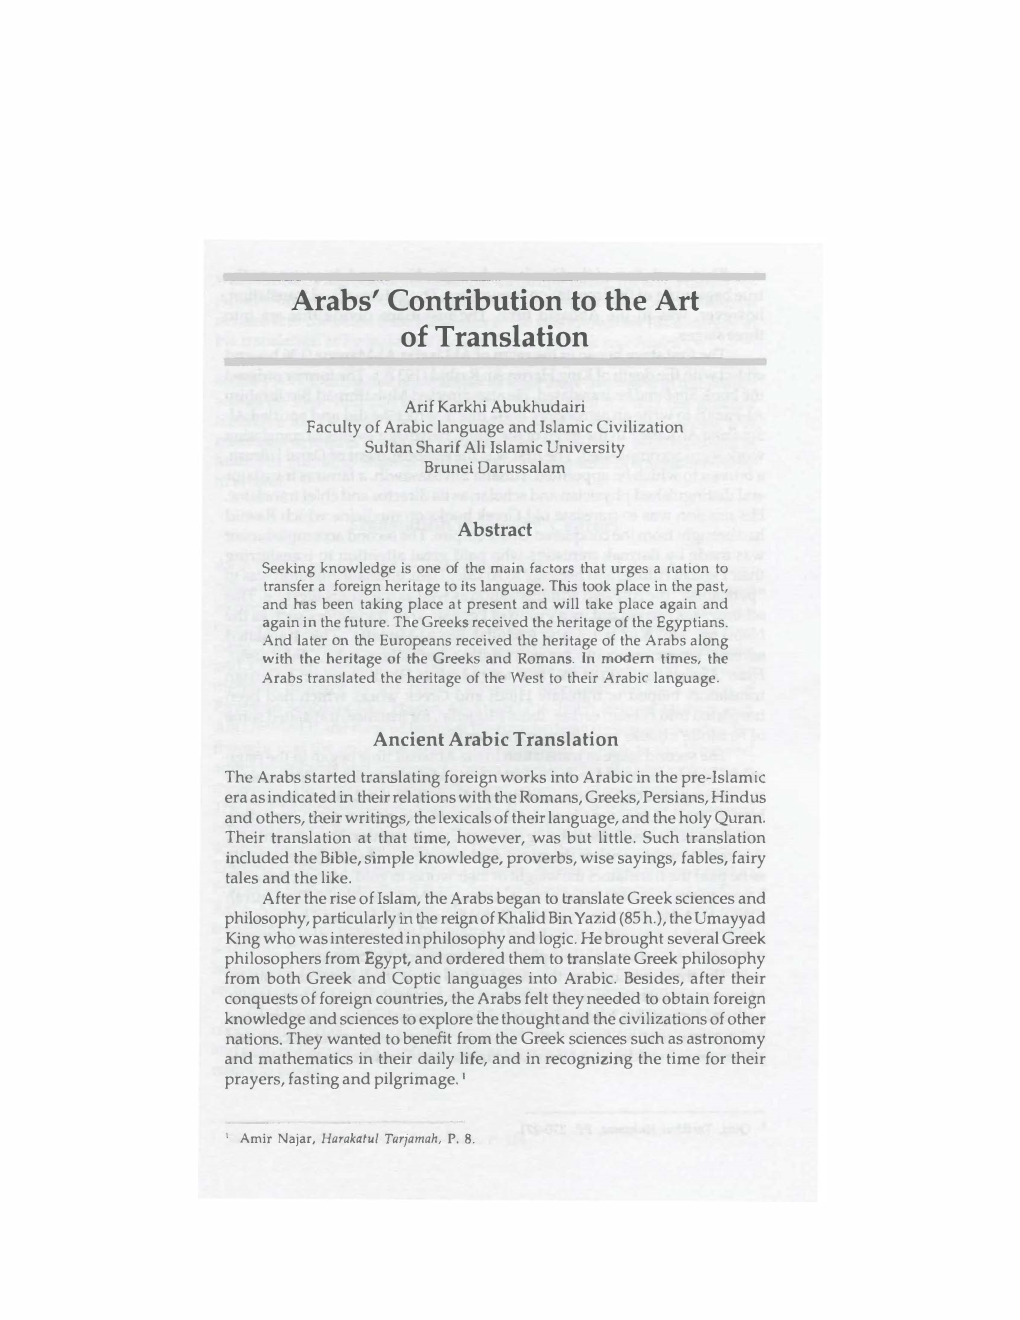 Arabs' Contribution to the Art of Translation